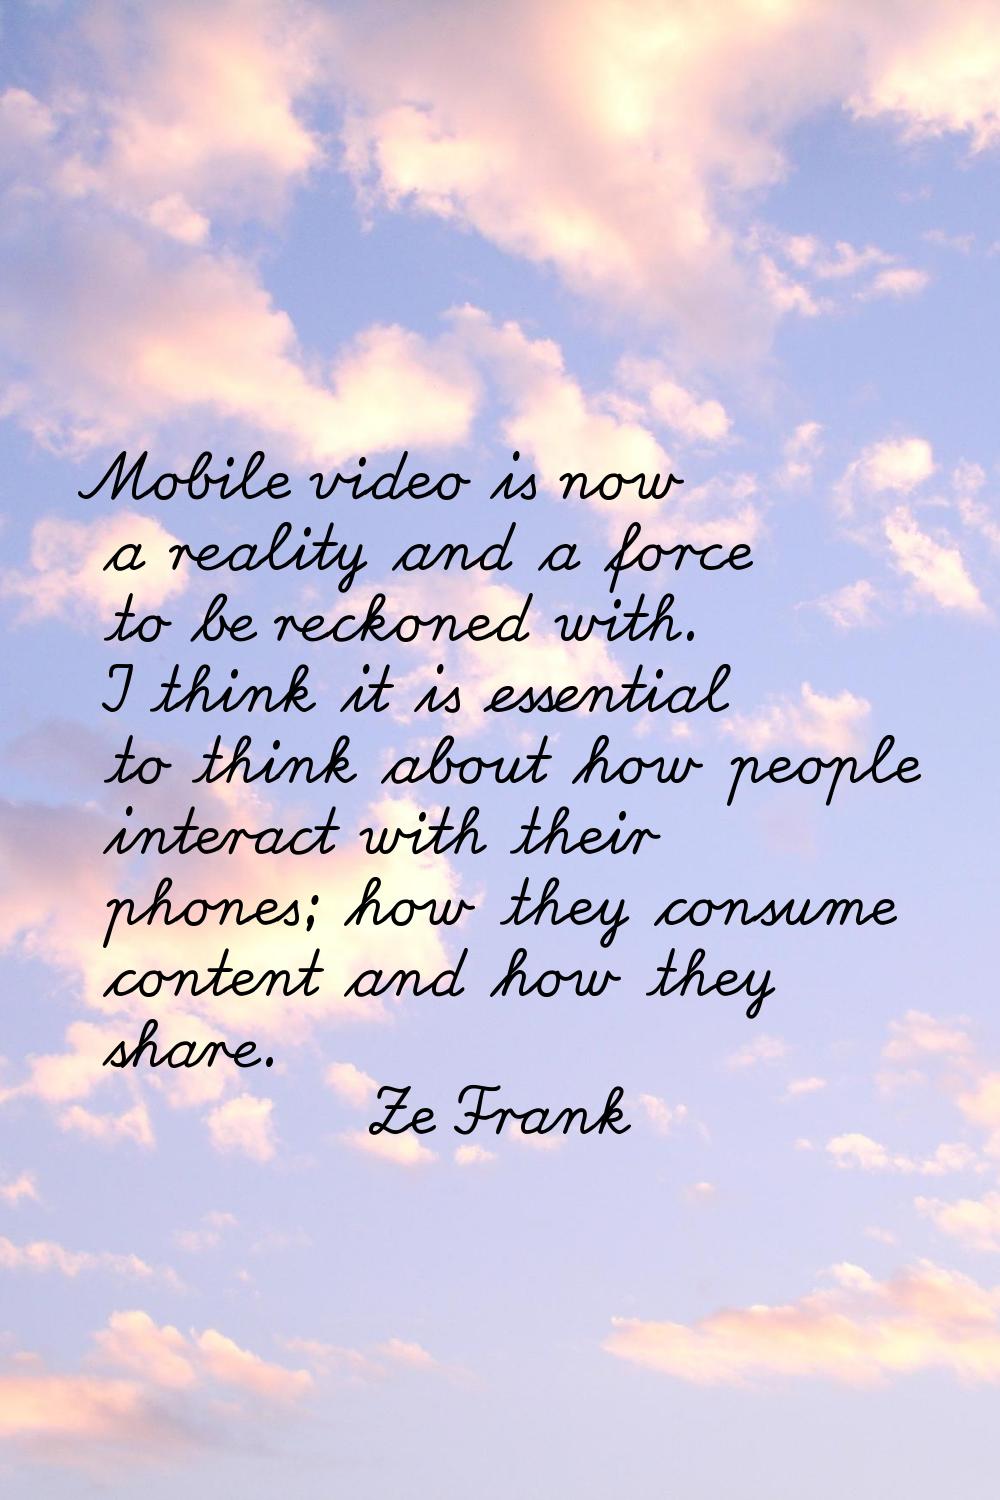 Mobile video is now a reality and a force to be reckoned with. I think it is essential to think abo